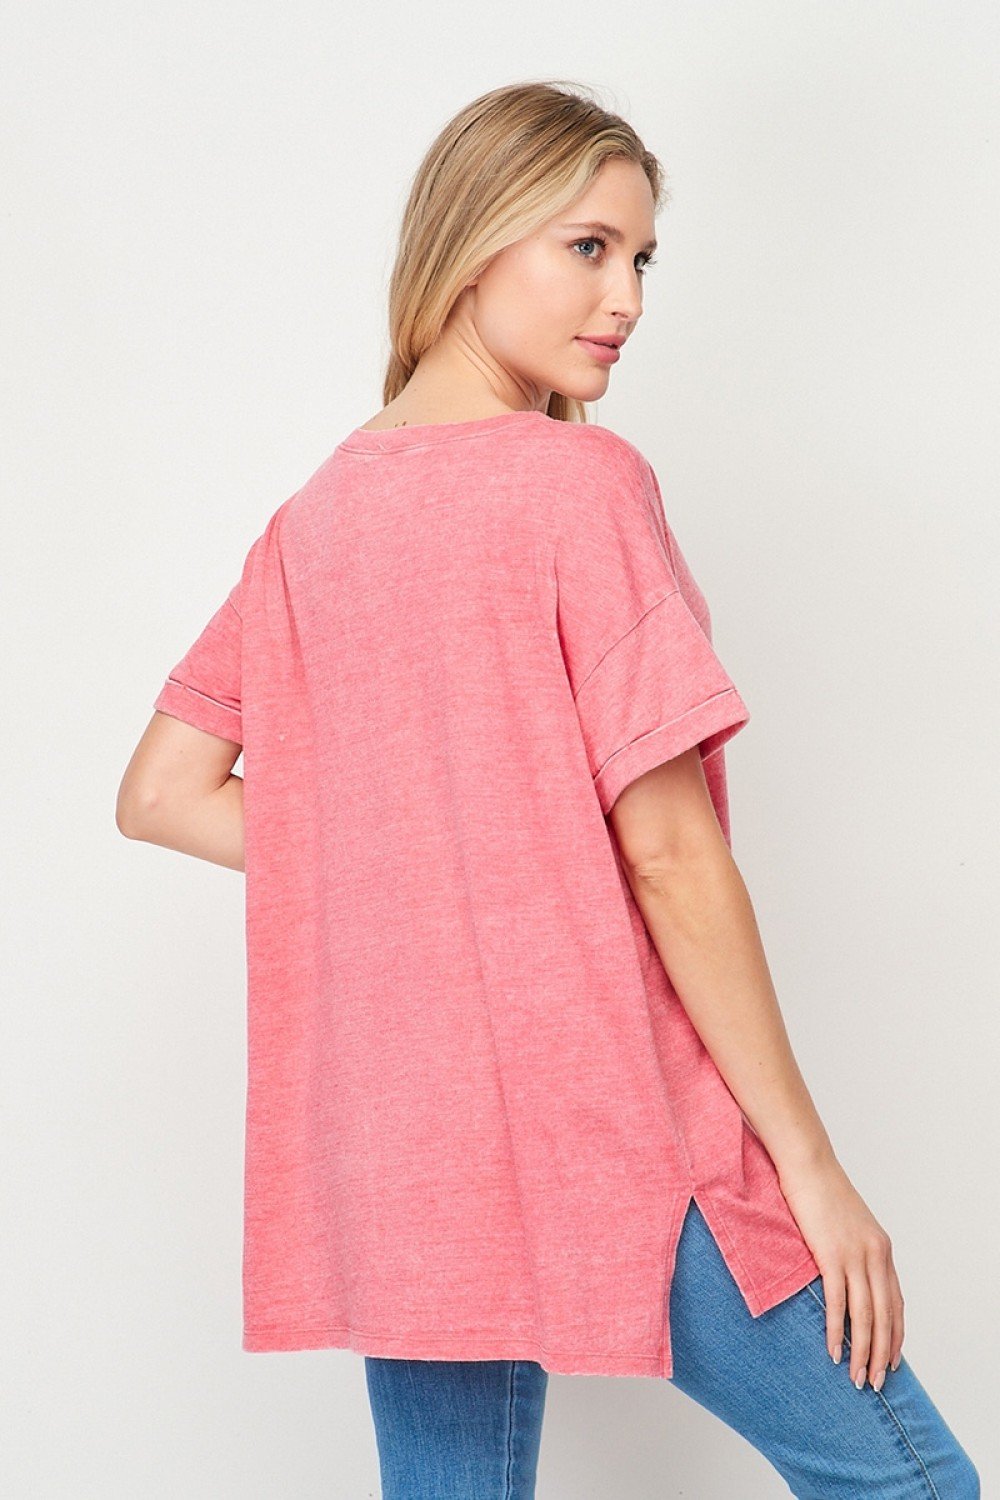 Mineral Wash Cuffed Sleeve Pocket Top  Ivy and Pearl Boutique   